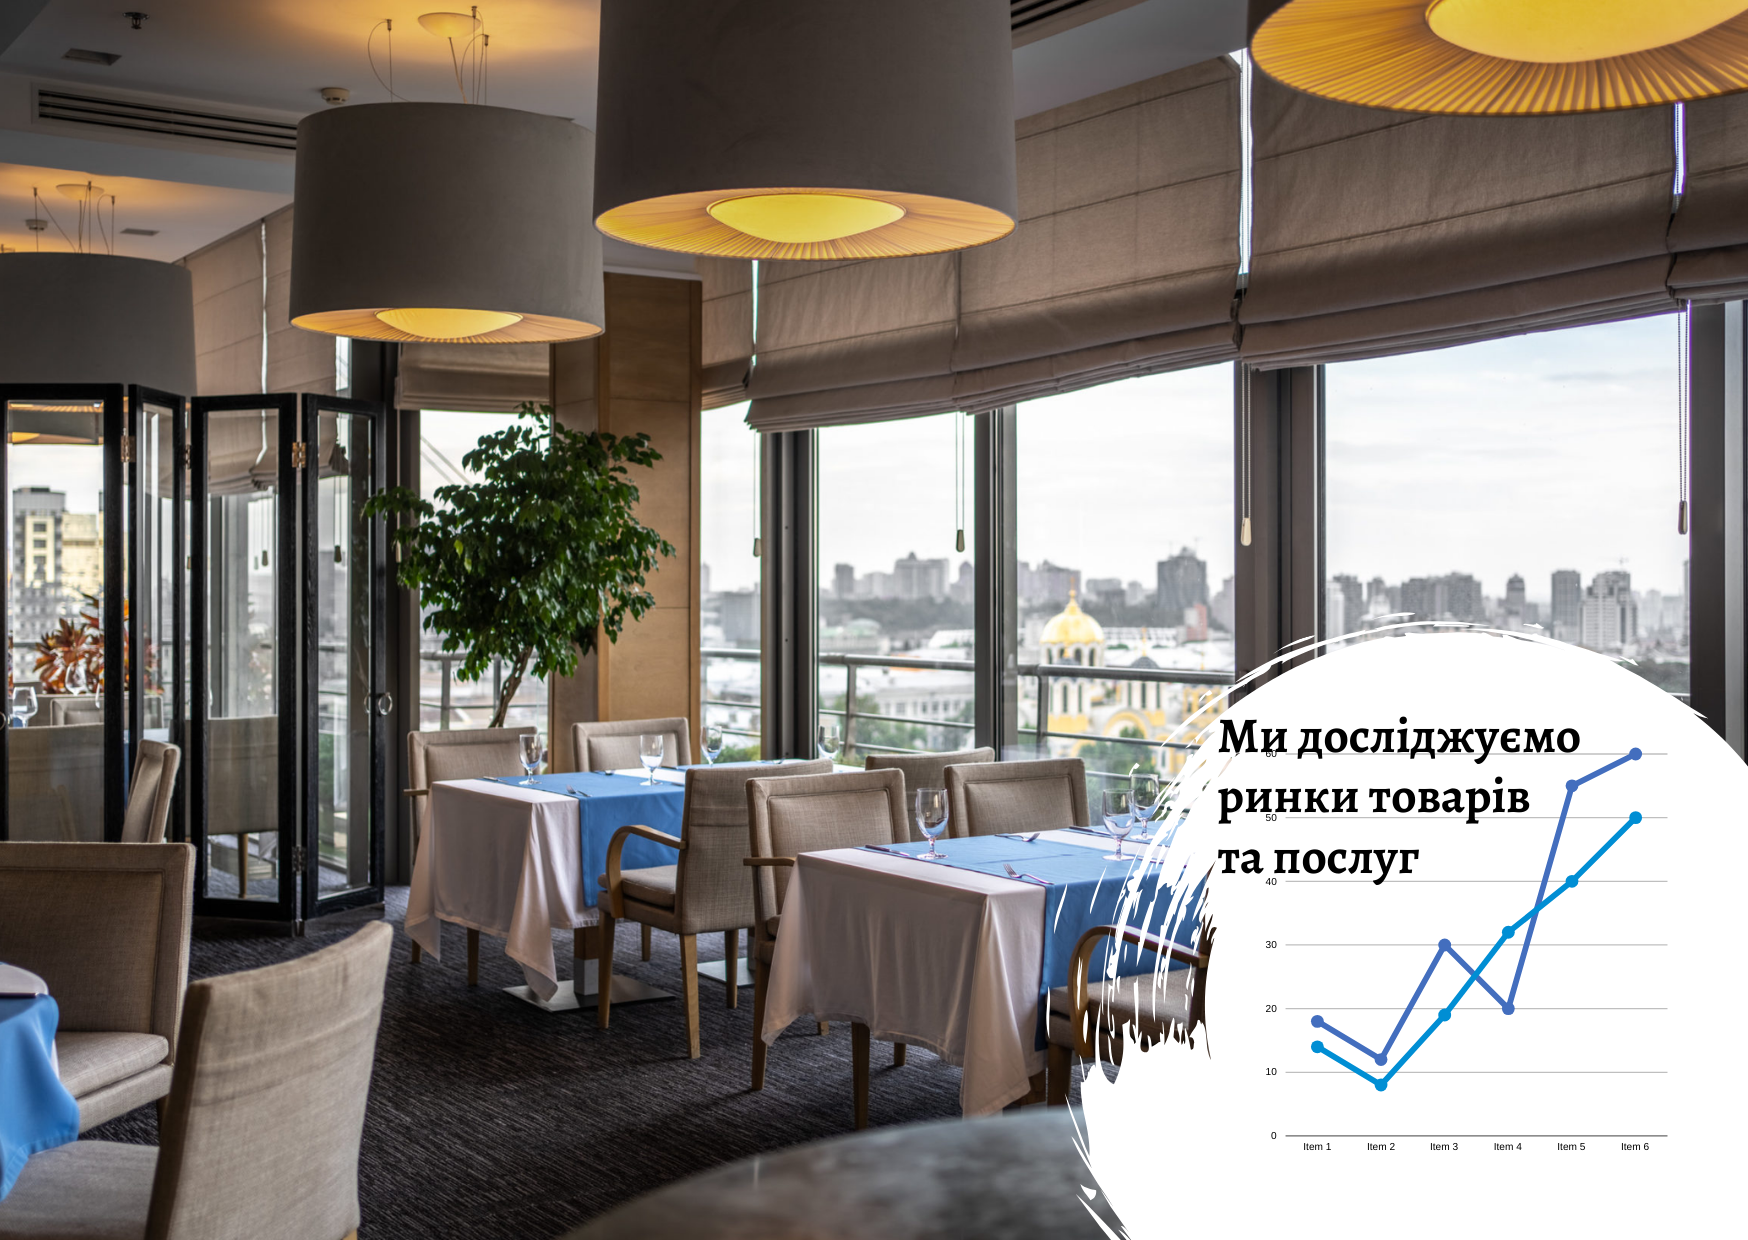 Ukrainian cafes and restaurants market: an average bill has increased by 18% 